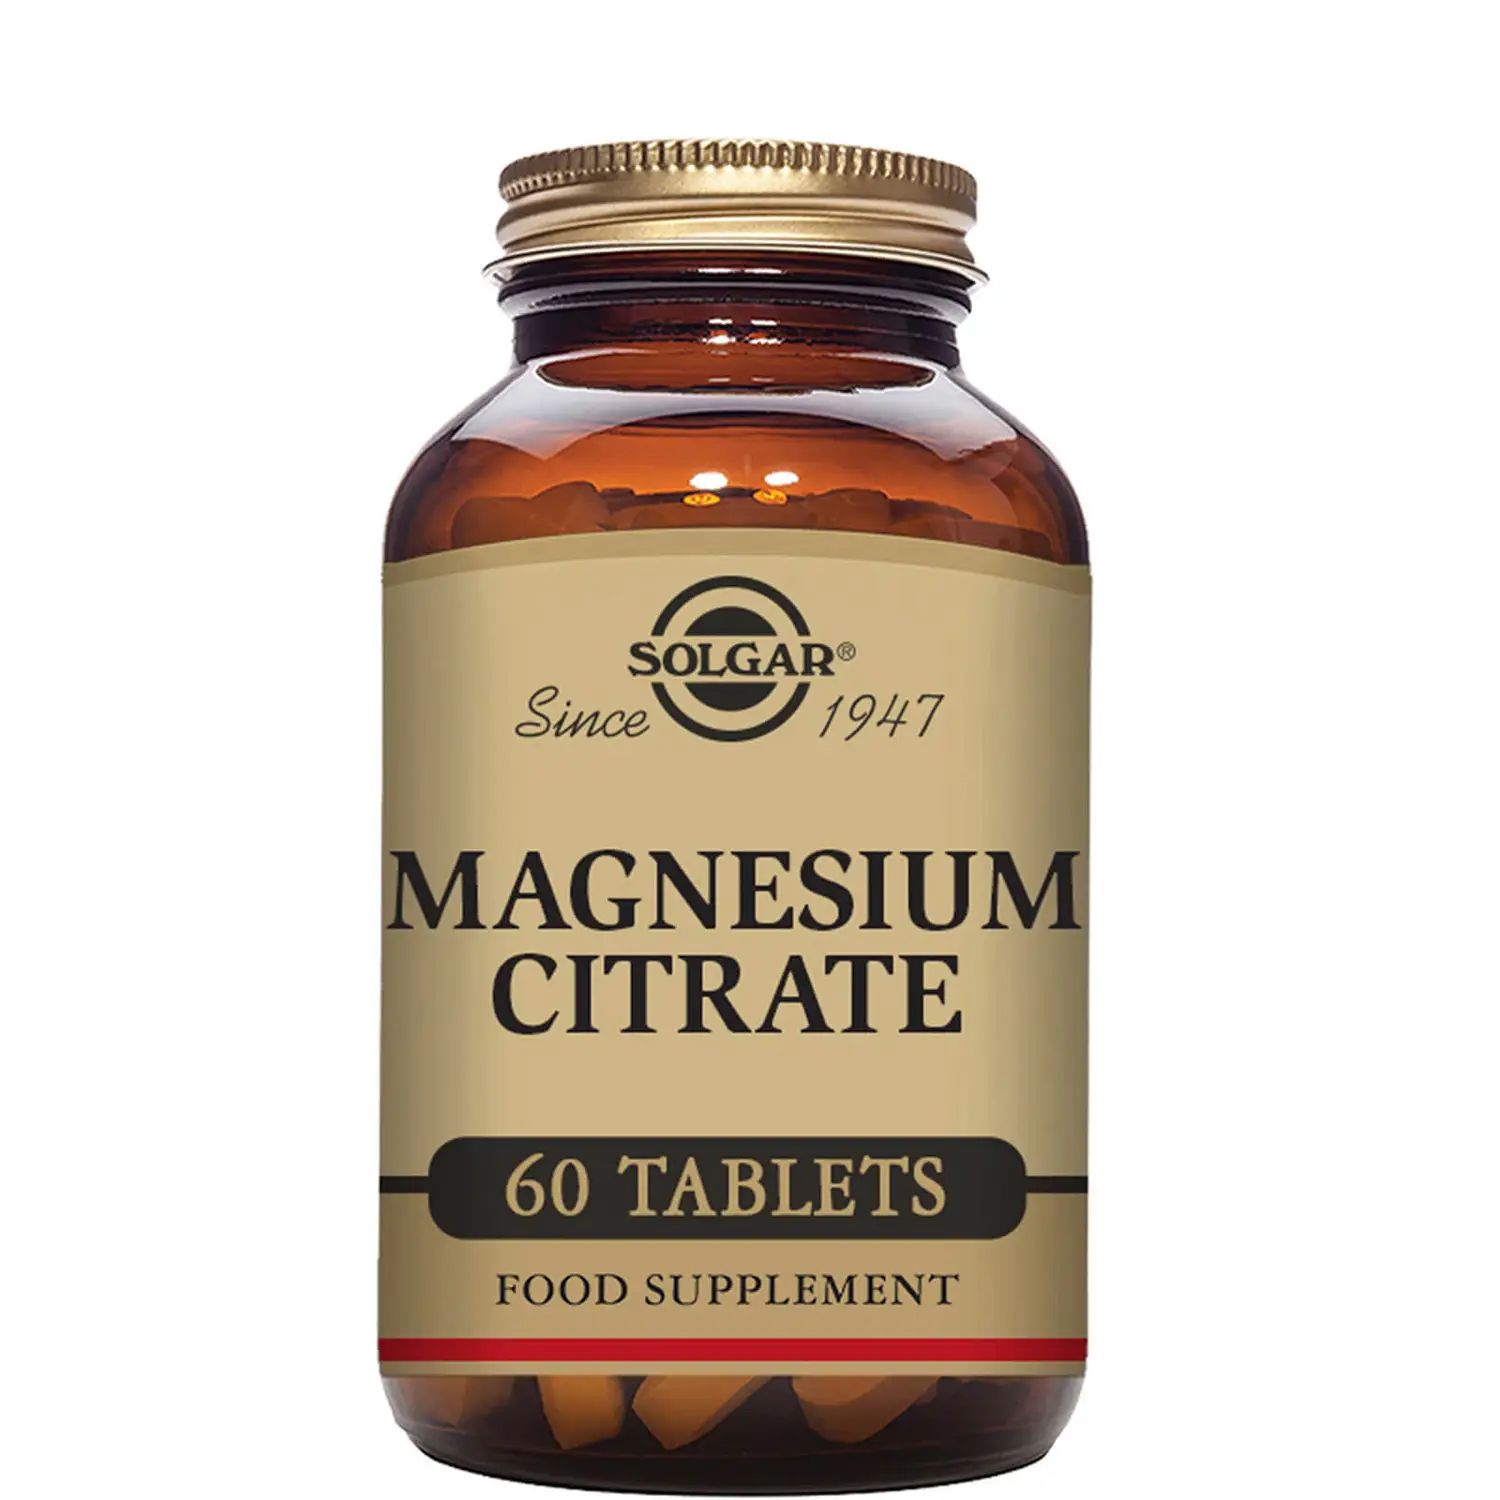 Solgar Magnesium Citrate Tablets - Pack of 60 | Cult Beauty